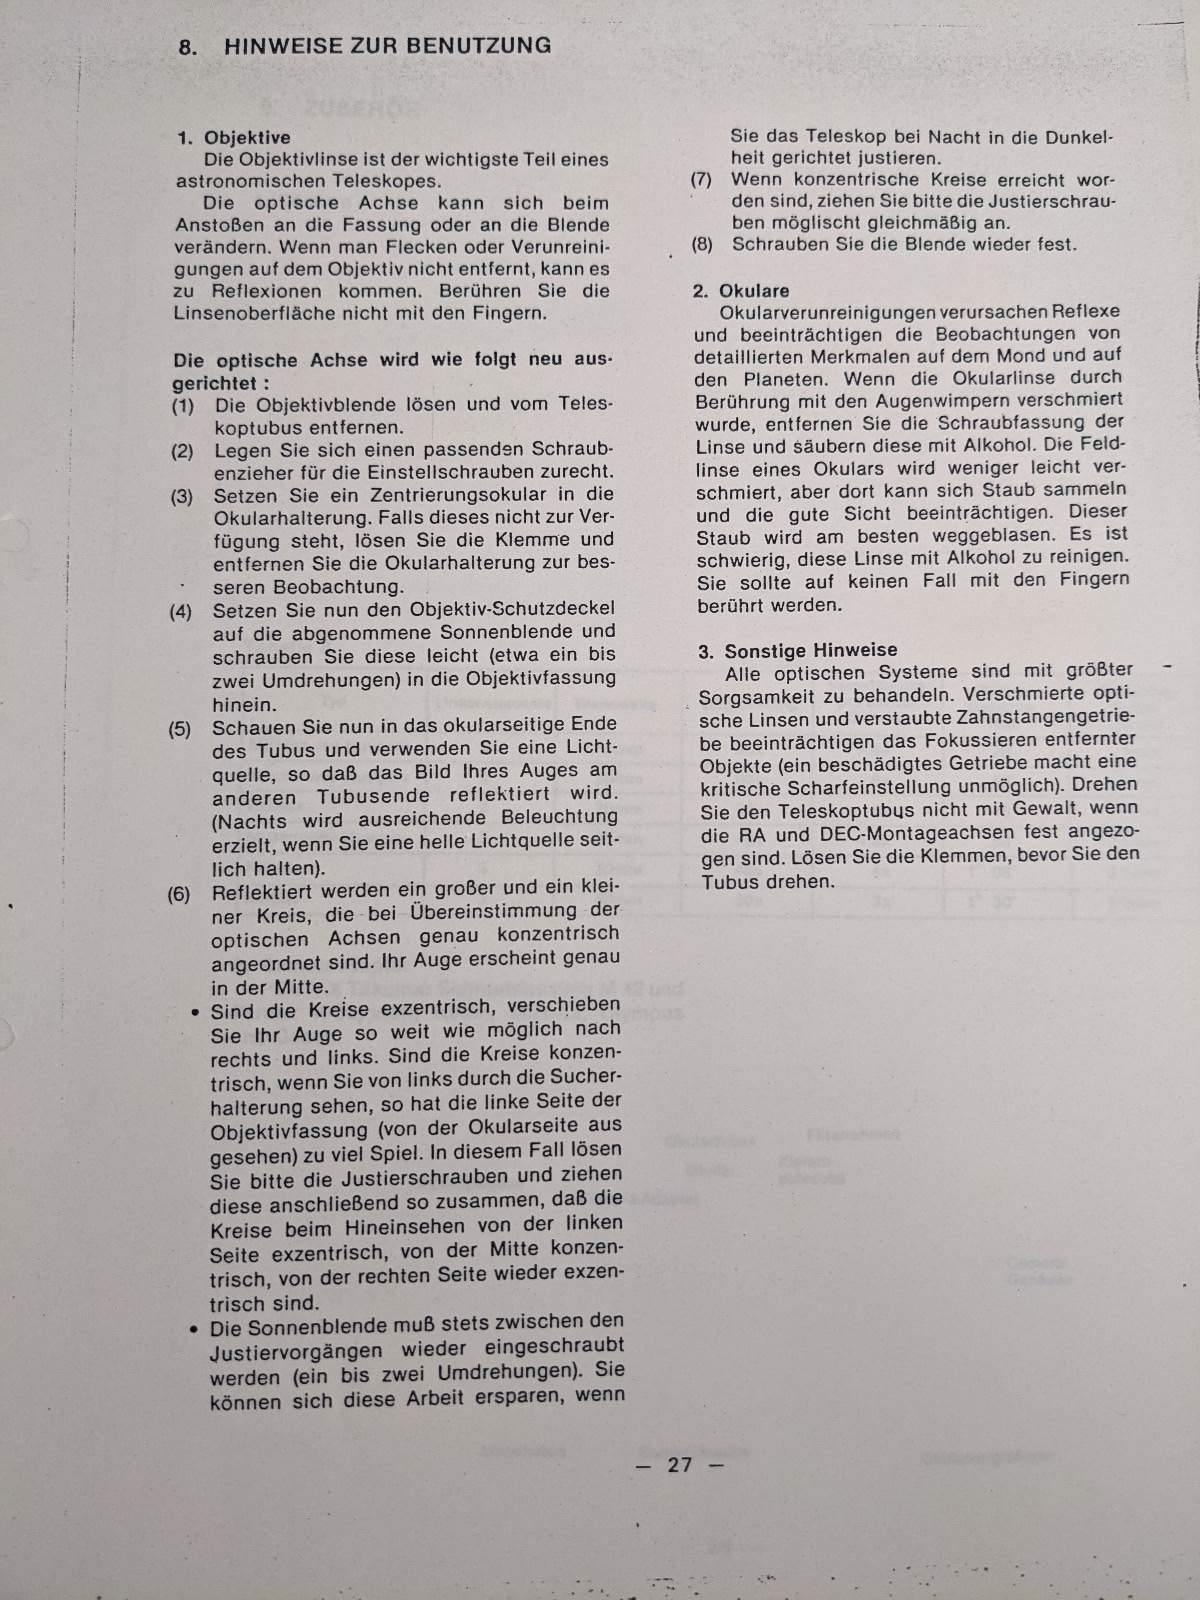 Pentax 100 complete operating instructions in German